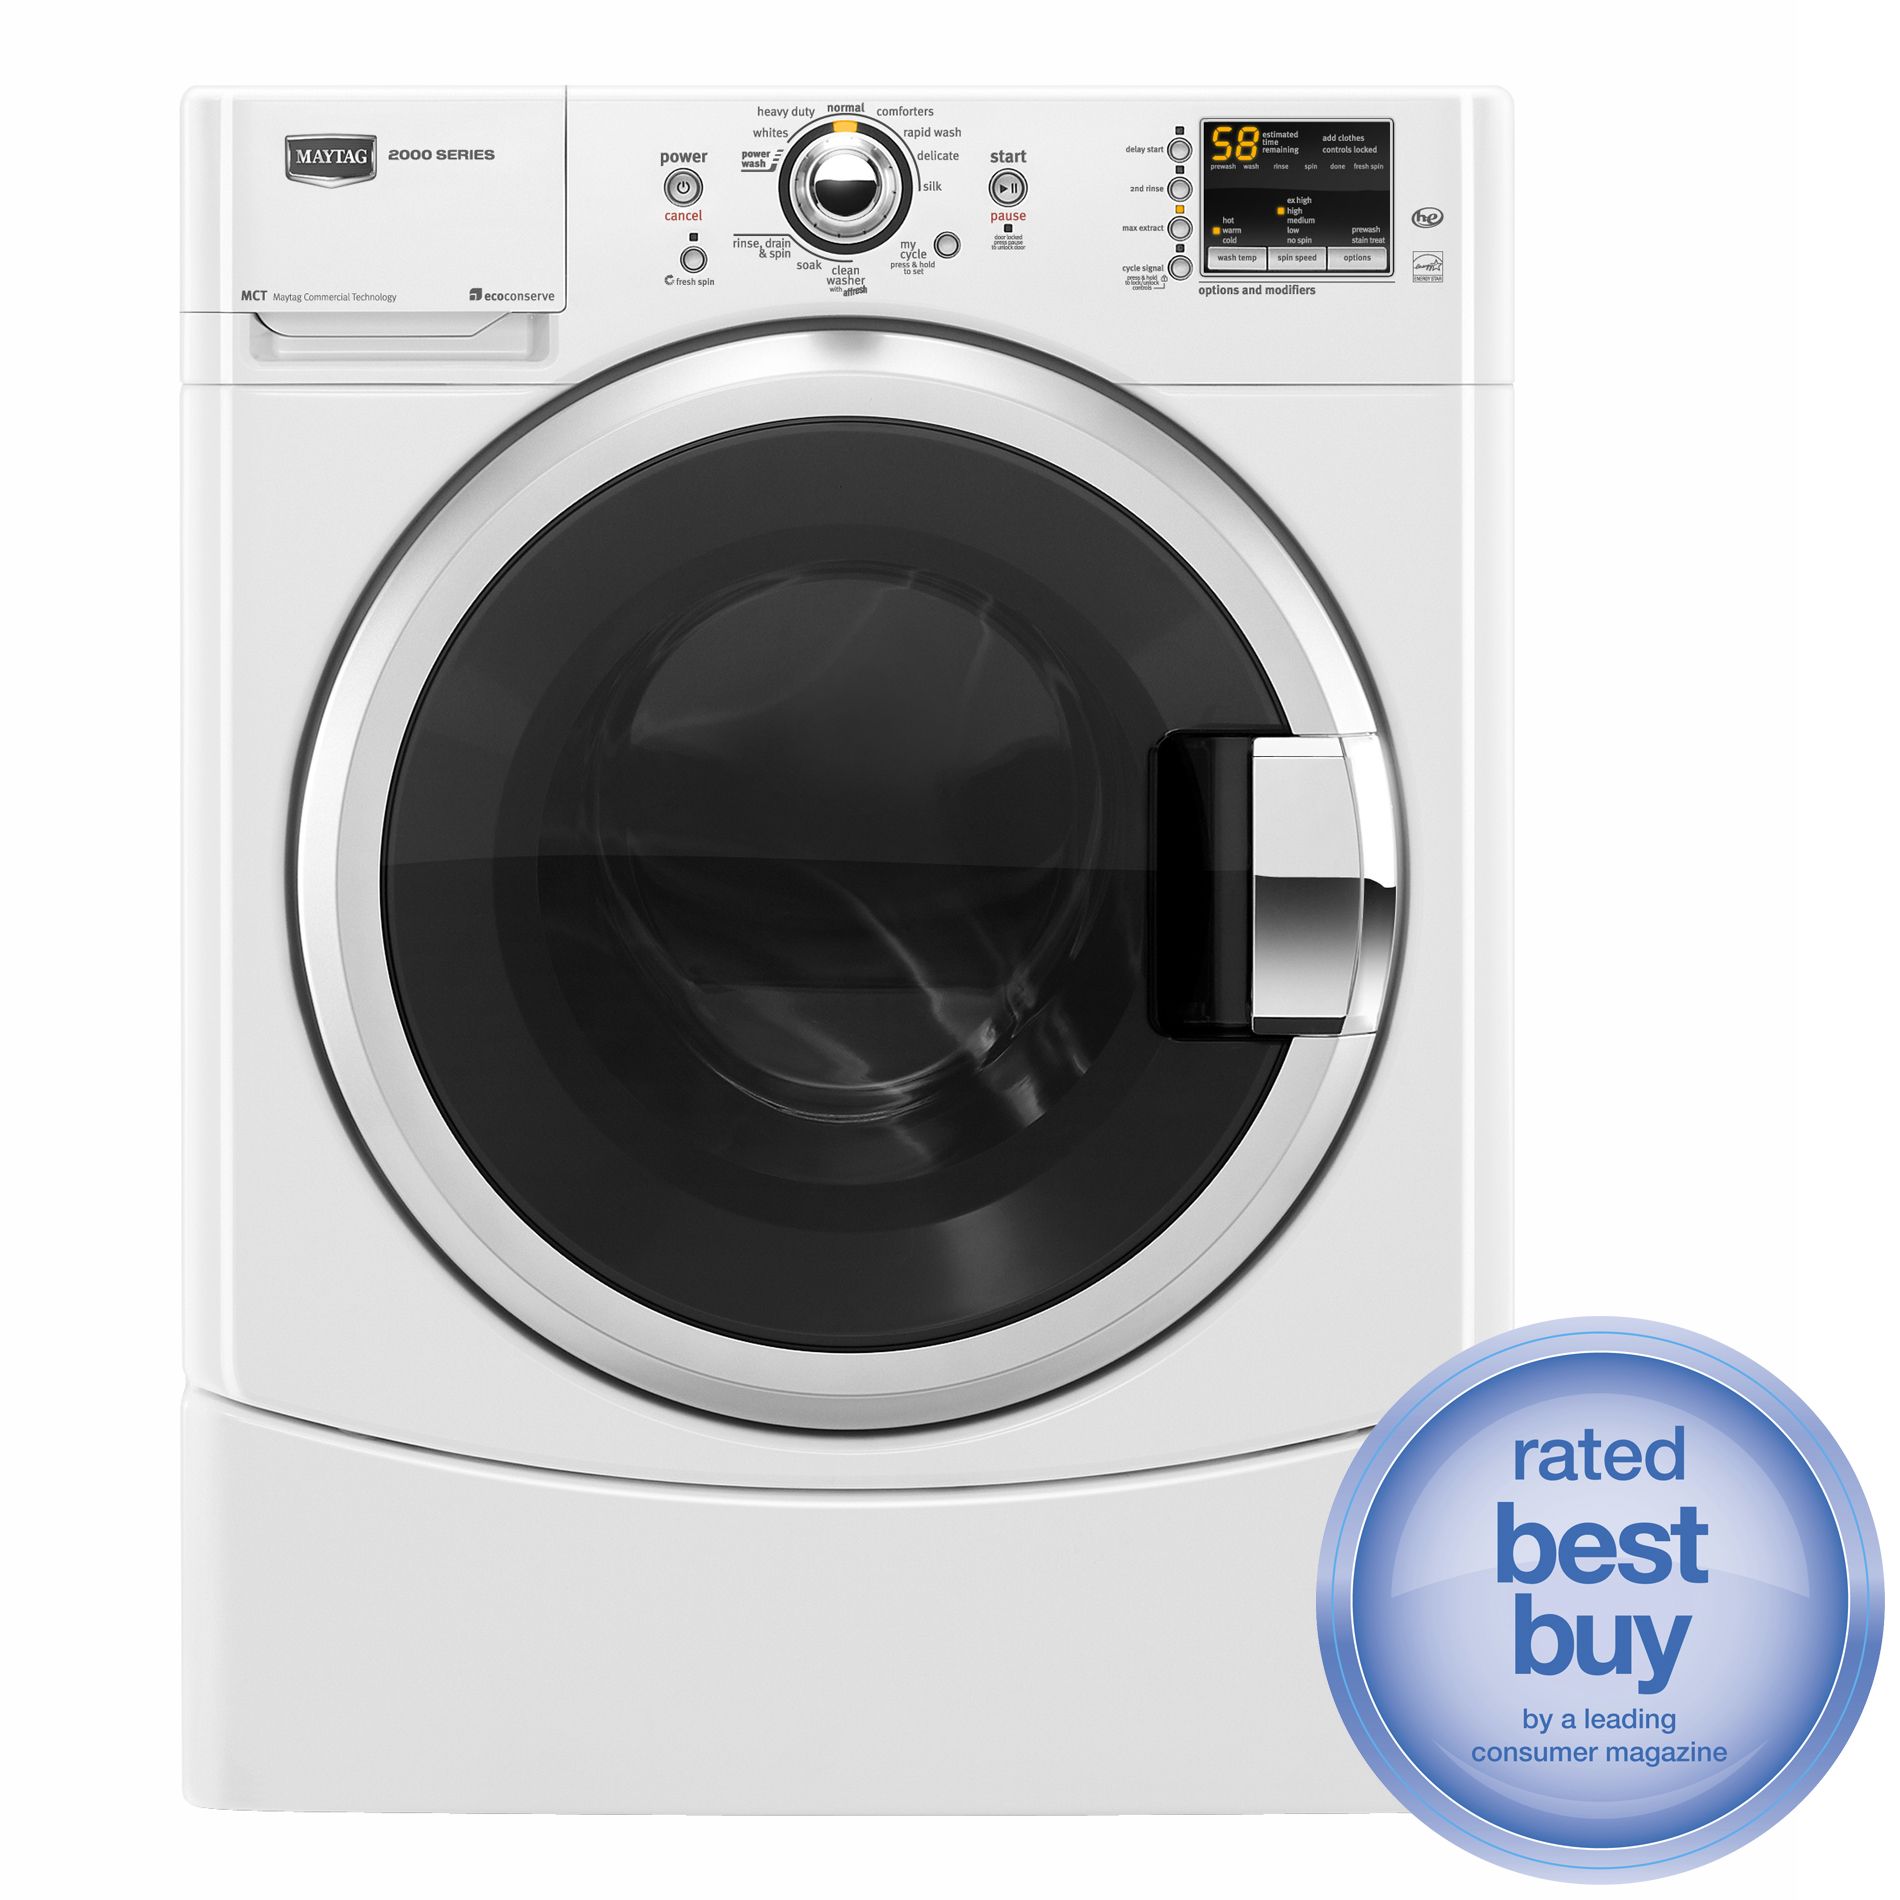 3.5 cu. ft. Front Load Washer (MHWE200XW)